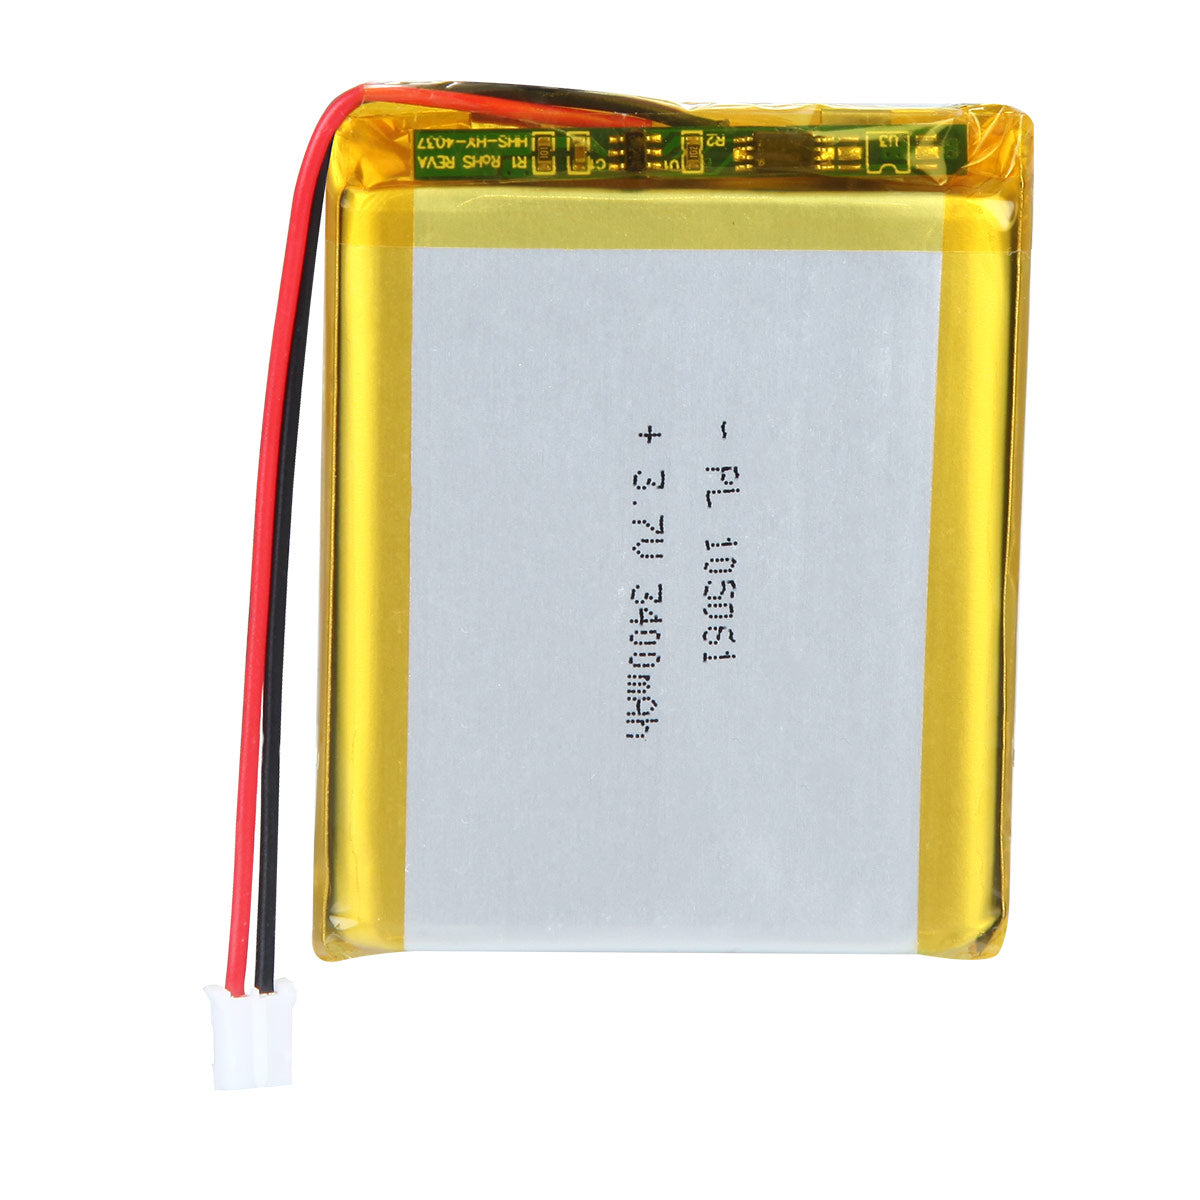 YDL 3.7V 3400mAh 105061 Rechargeable Lithium Polymer Battery Length 63mm